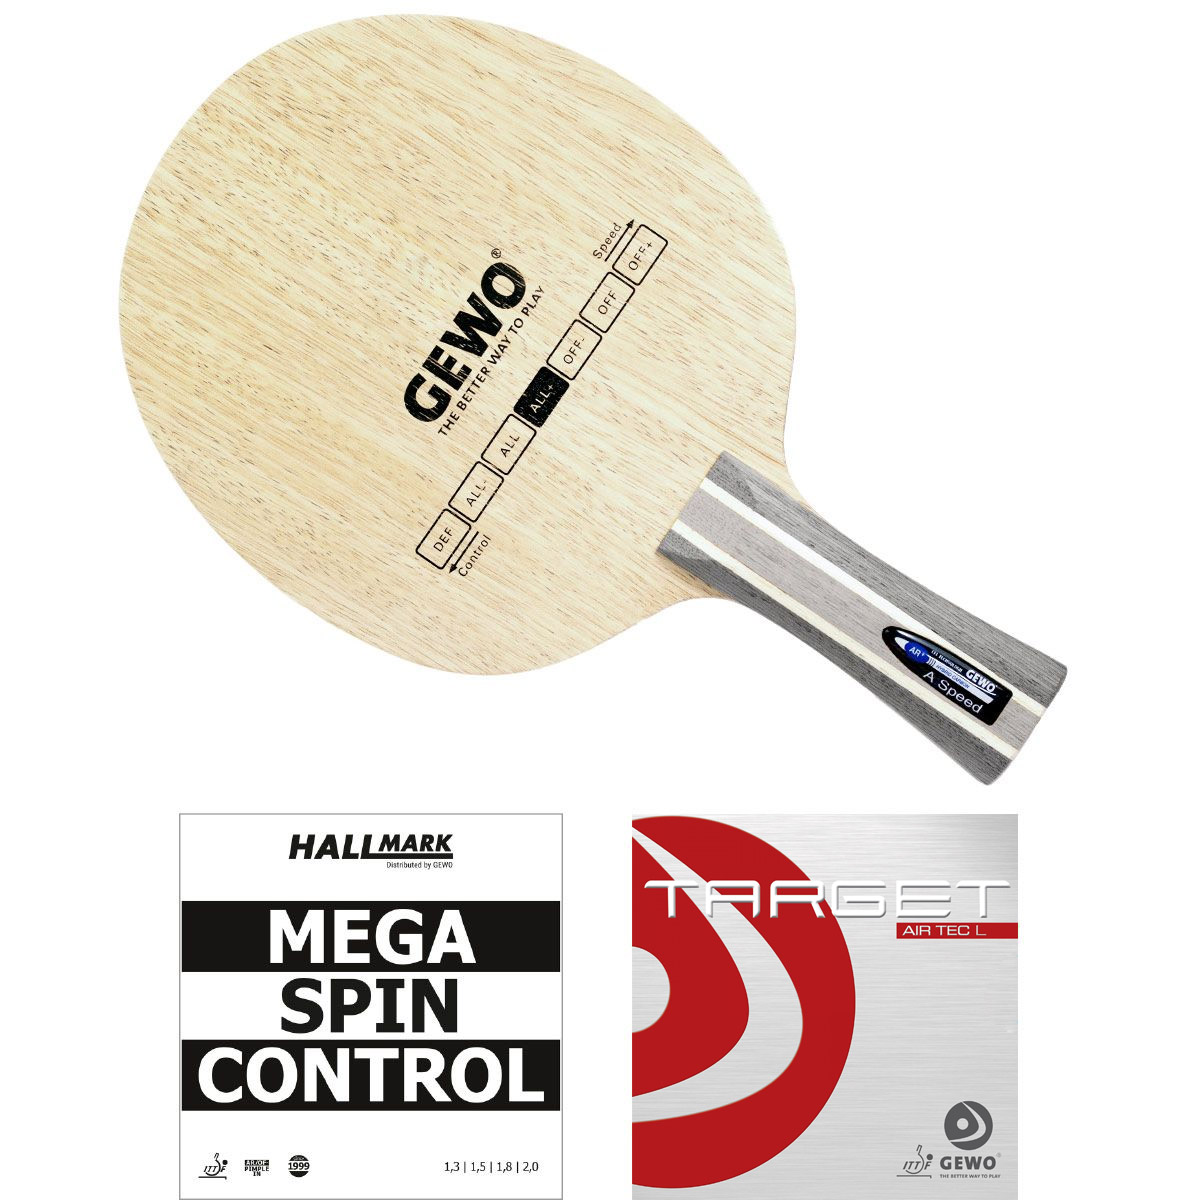 GEWO Bat: Blade Hybrid Carbon A/Speed with Mega Spin Control + Target airTEC L  flared